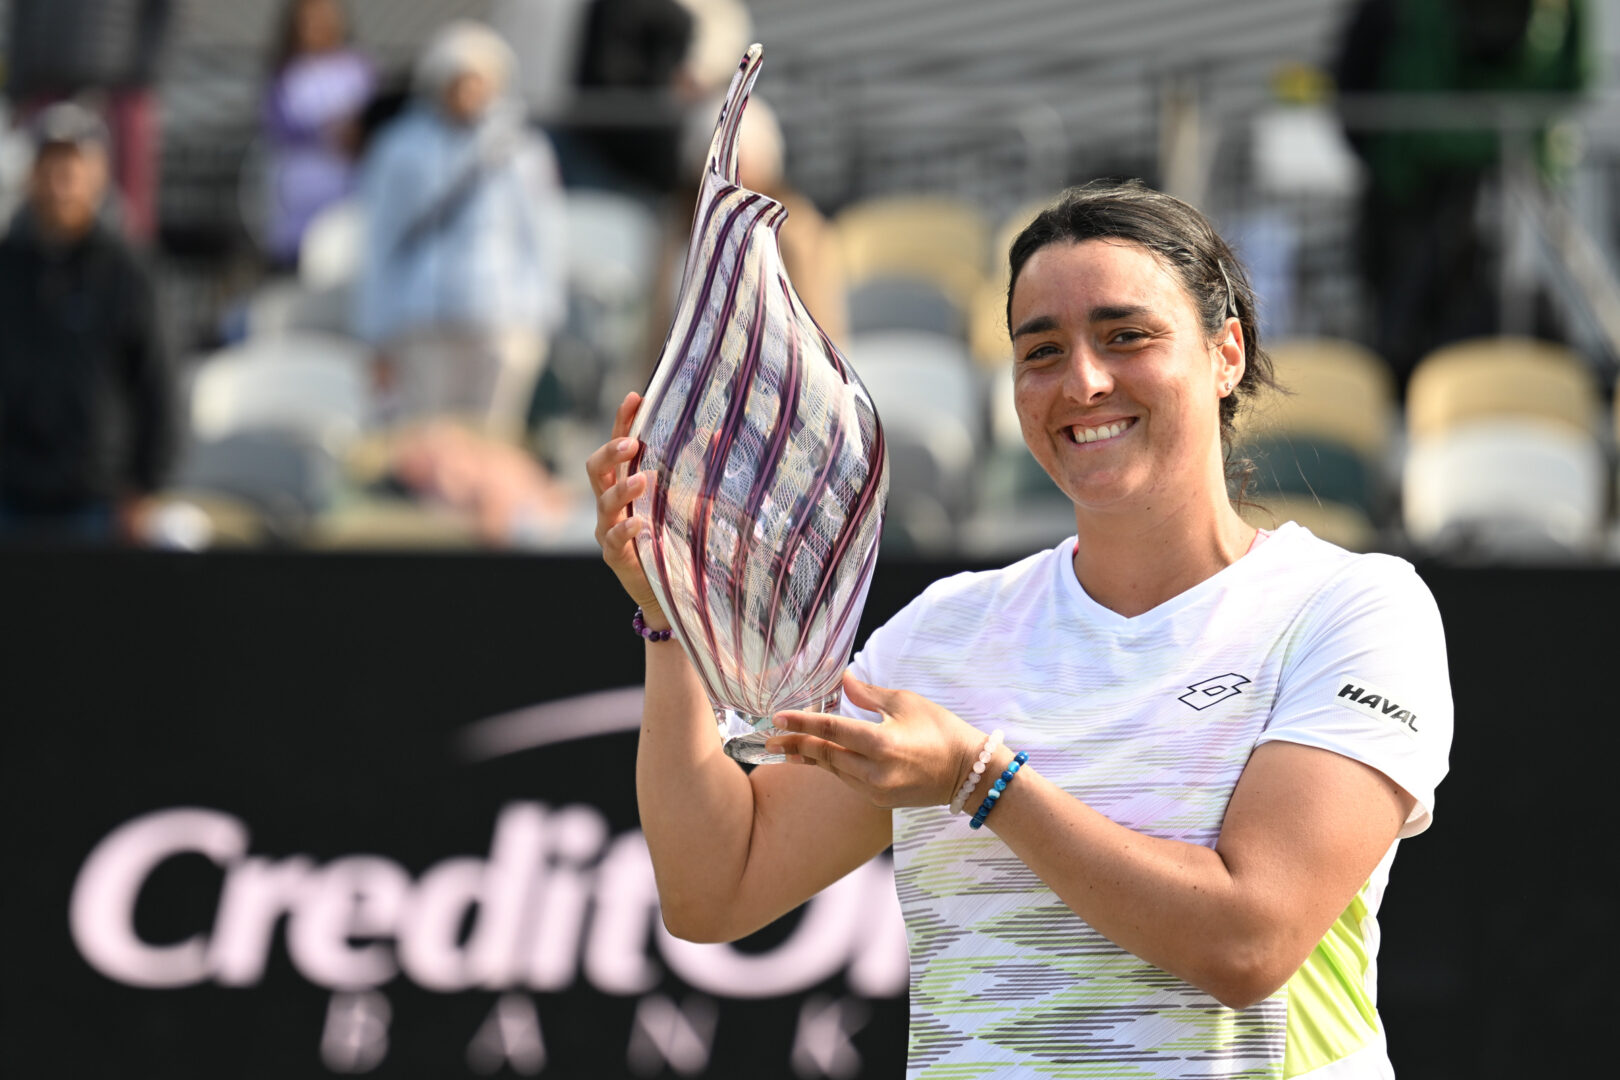 Jabeur claims Charleston Open title in 2022 re-match win over Bencic